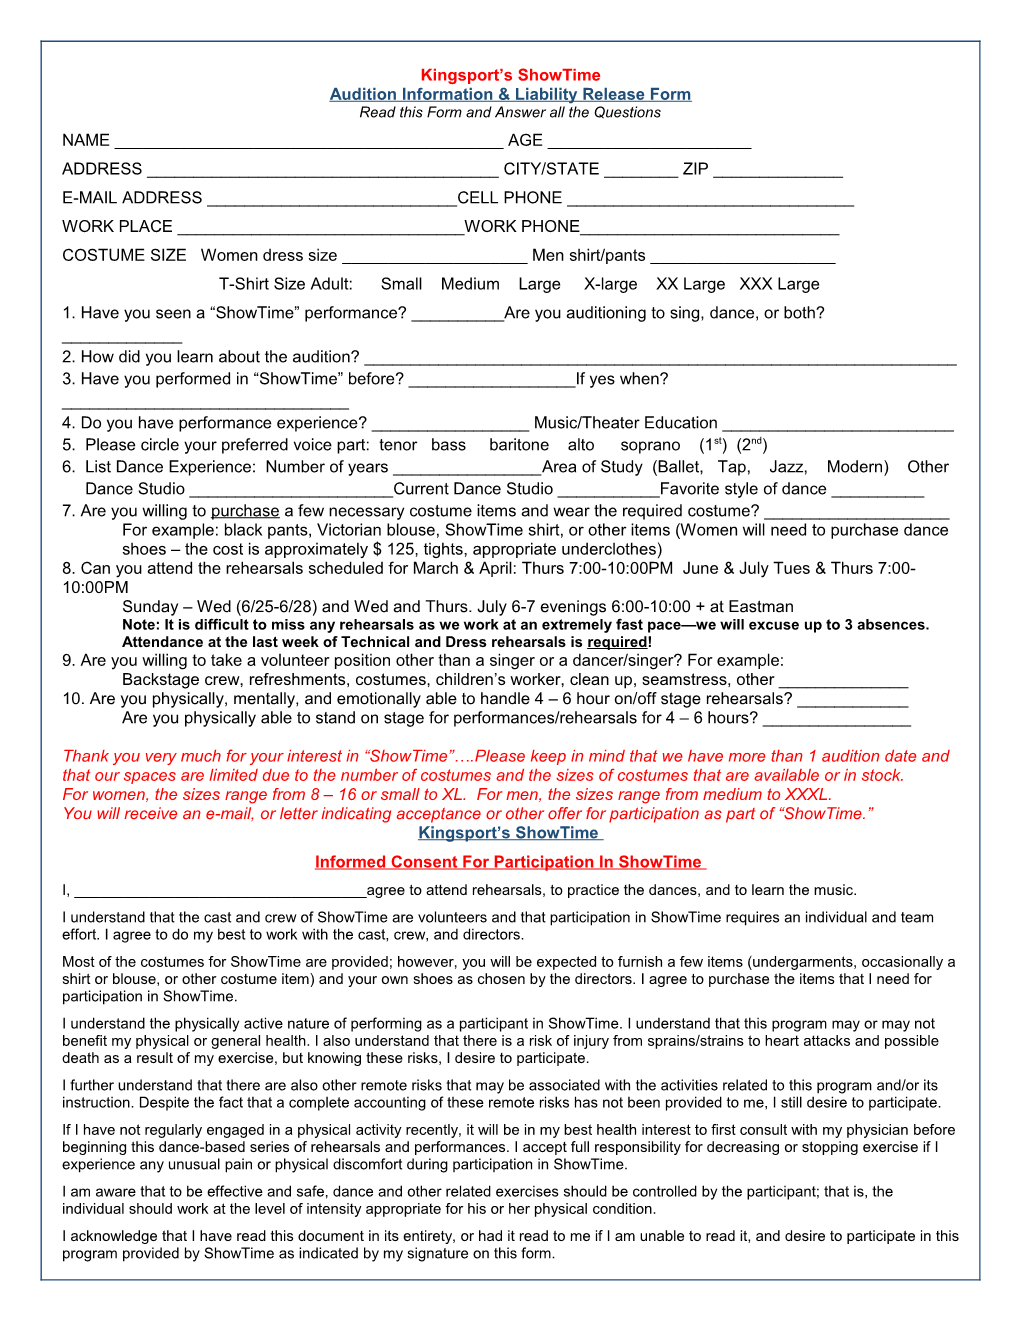 Audition Information & Liability Release Form